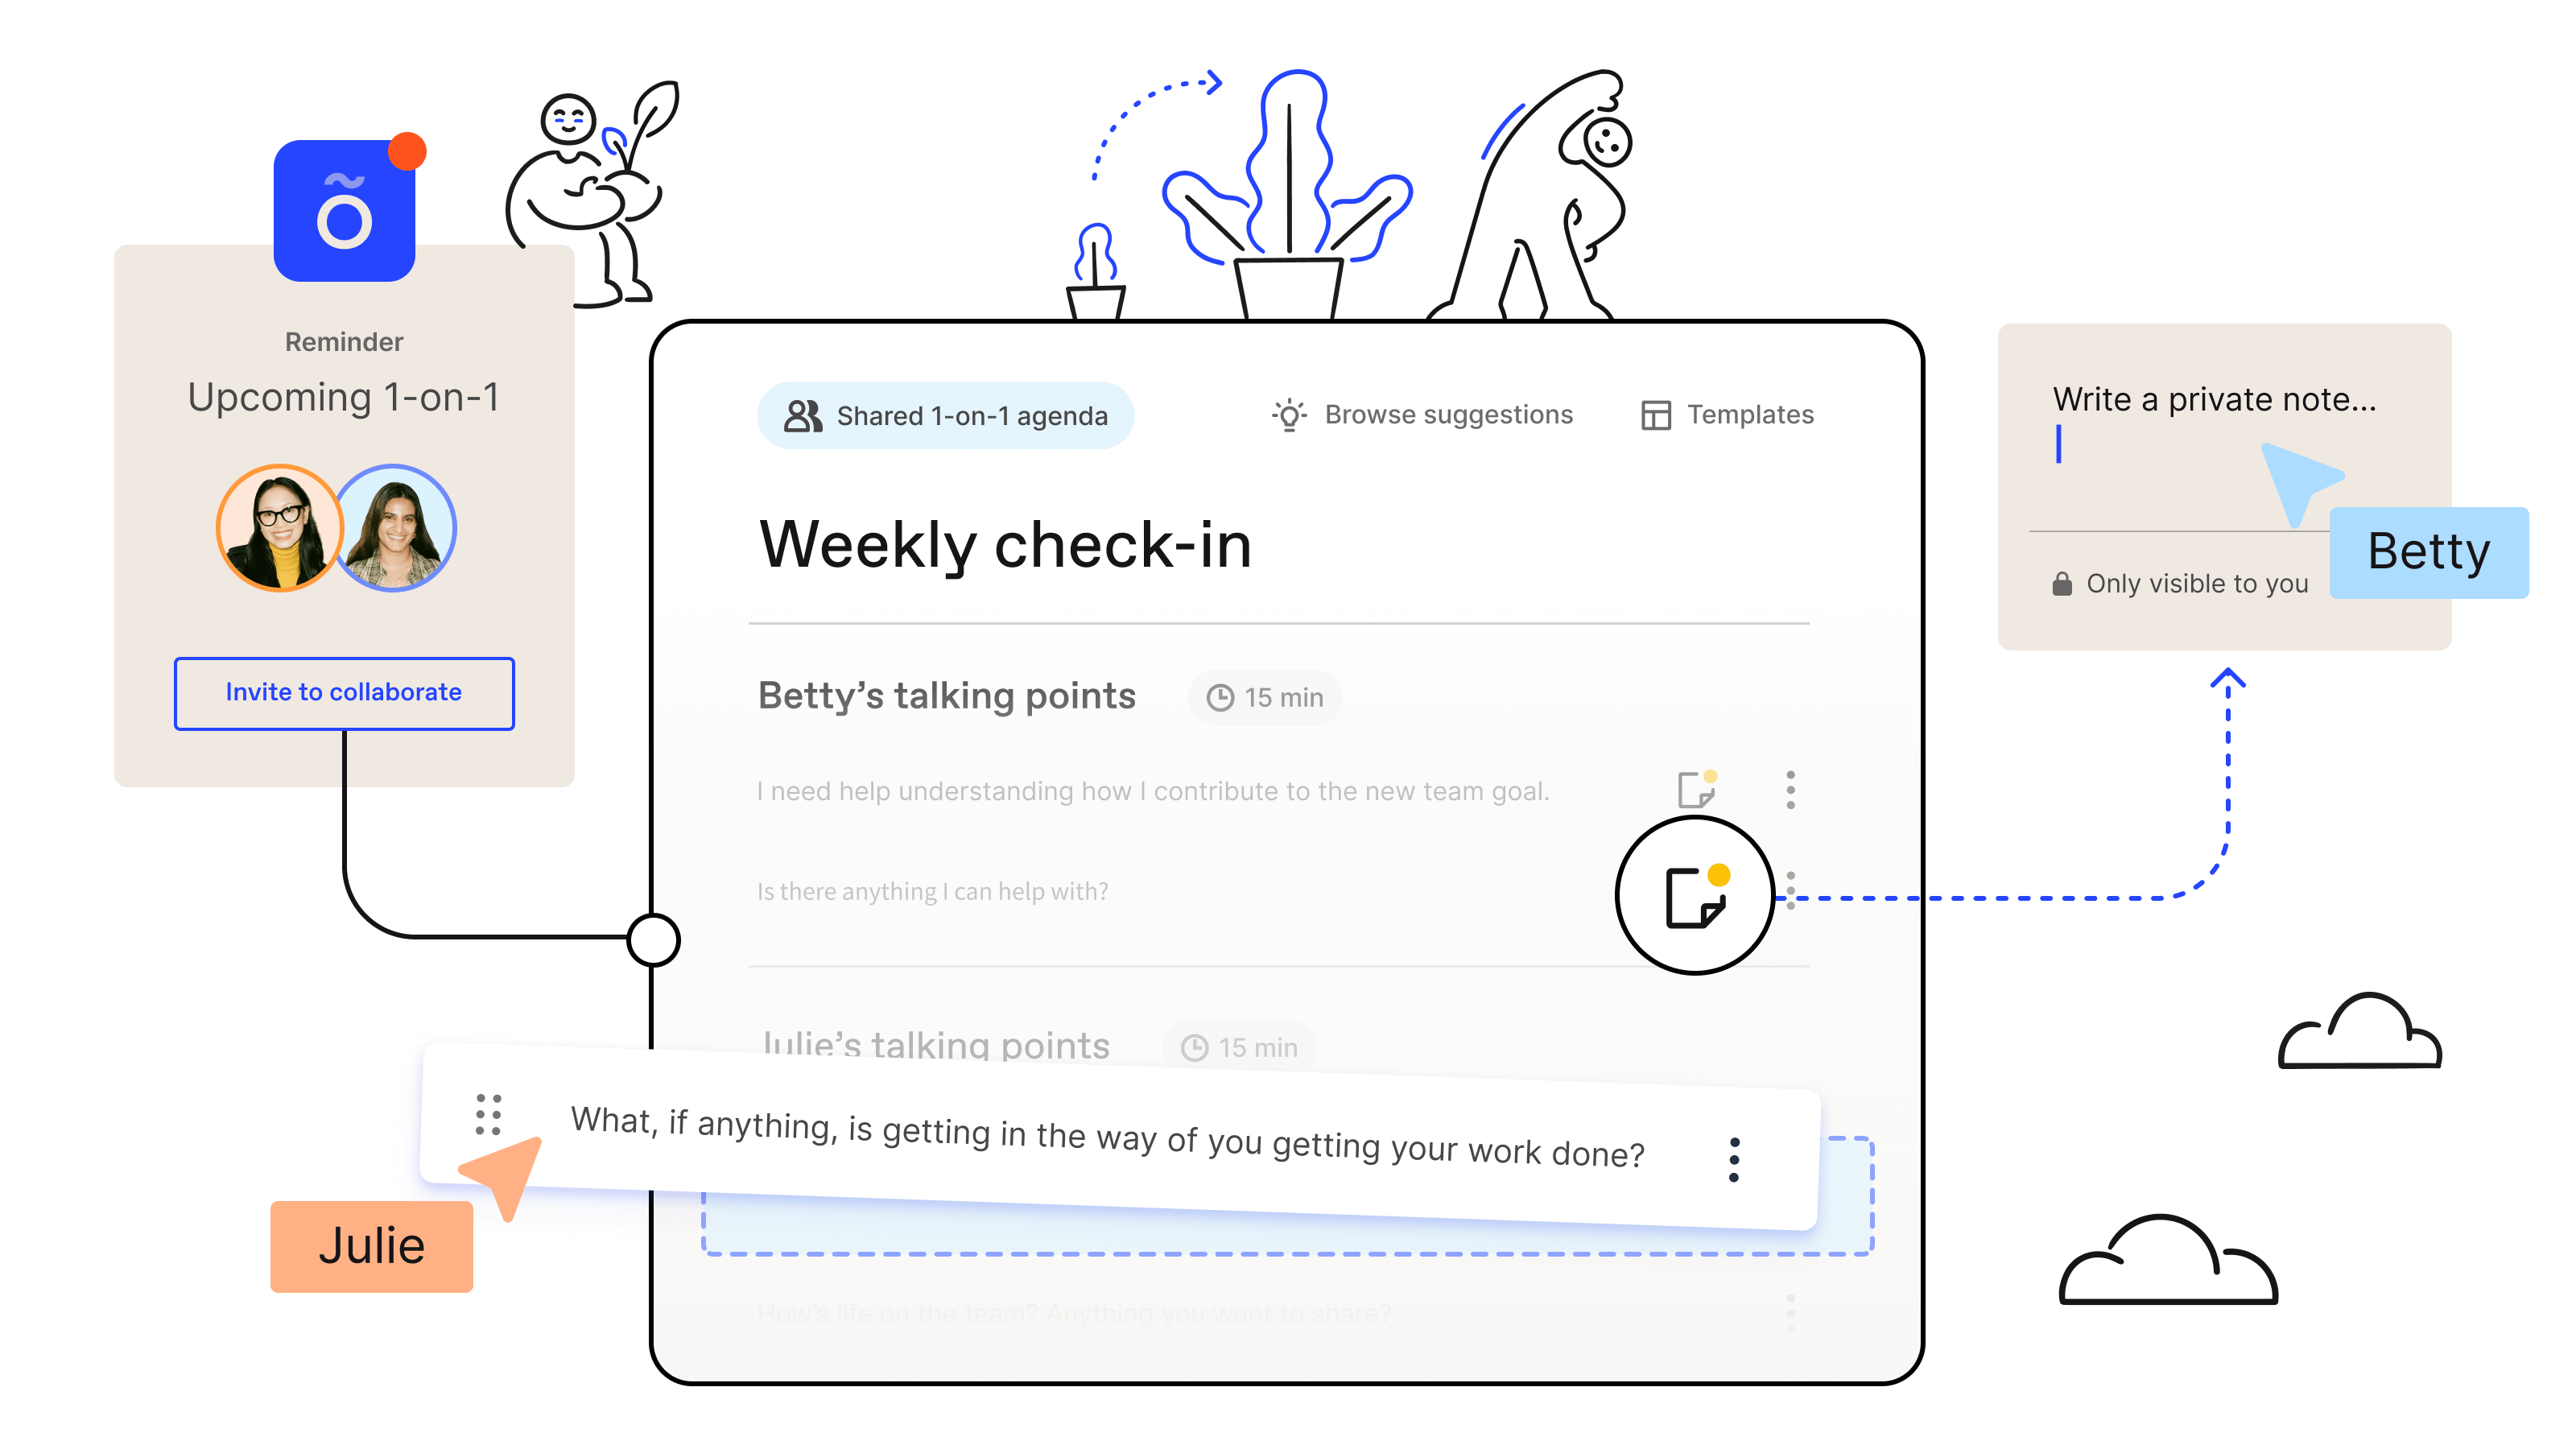 Officevibe’s weekly check-in collaborative agenda builder for an upcoming 1-on-1 meeting with custom duration and talking points.